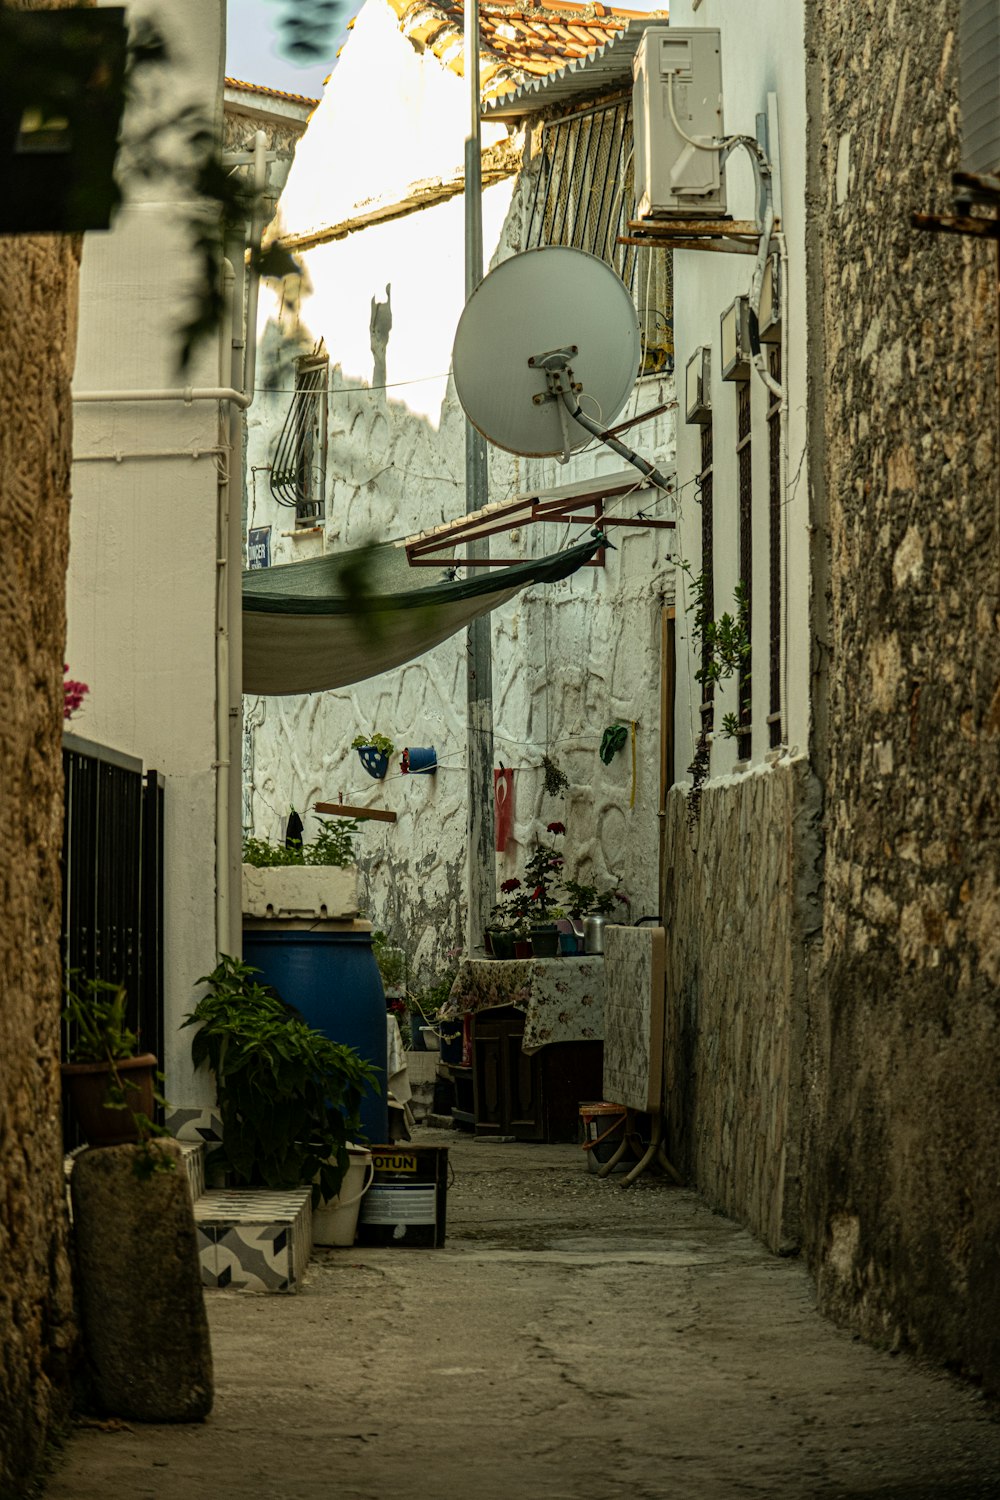 a narrow alley way with a satellite dish on the roof